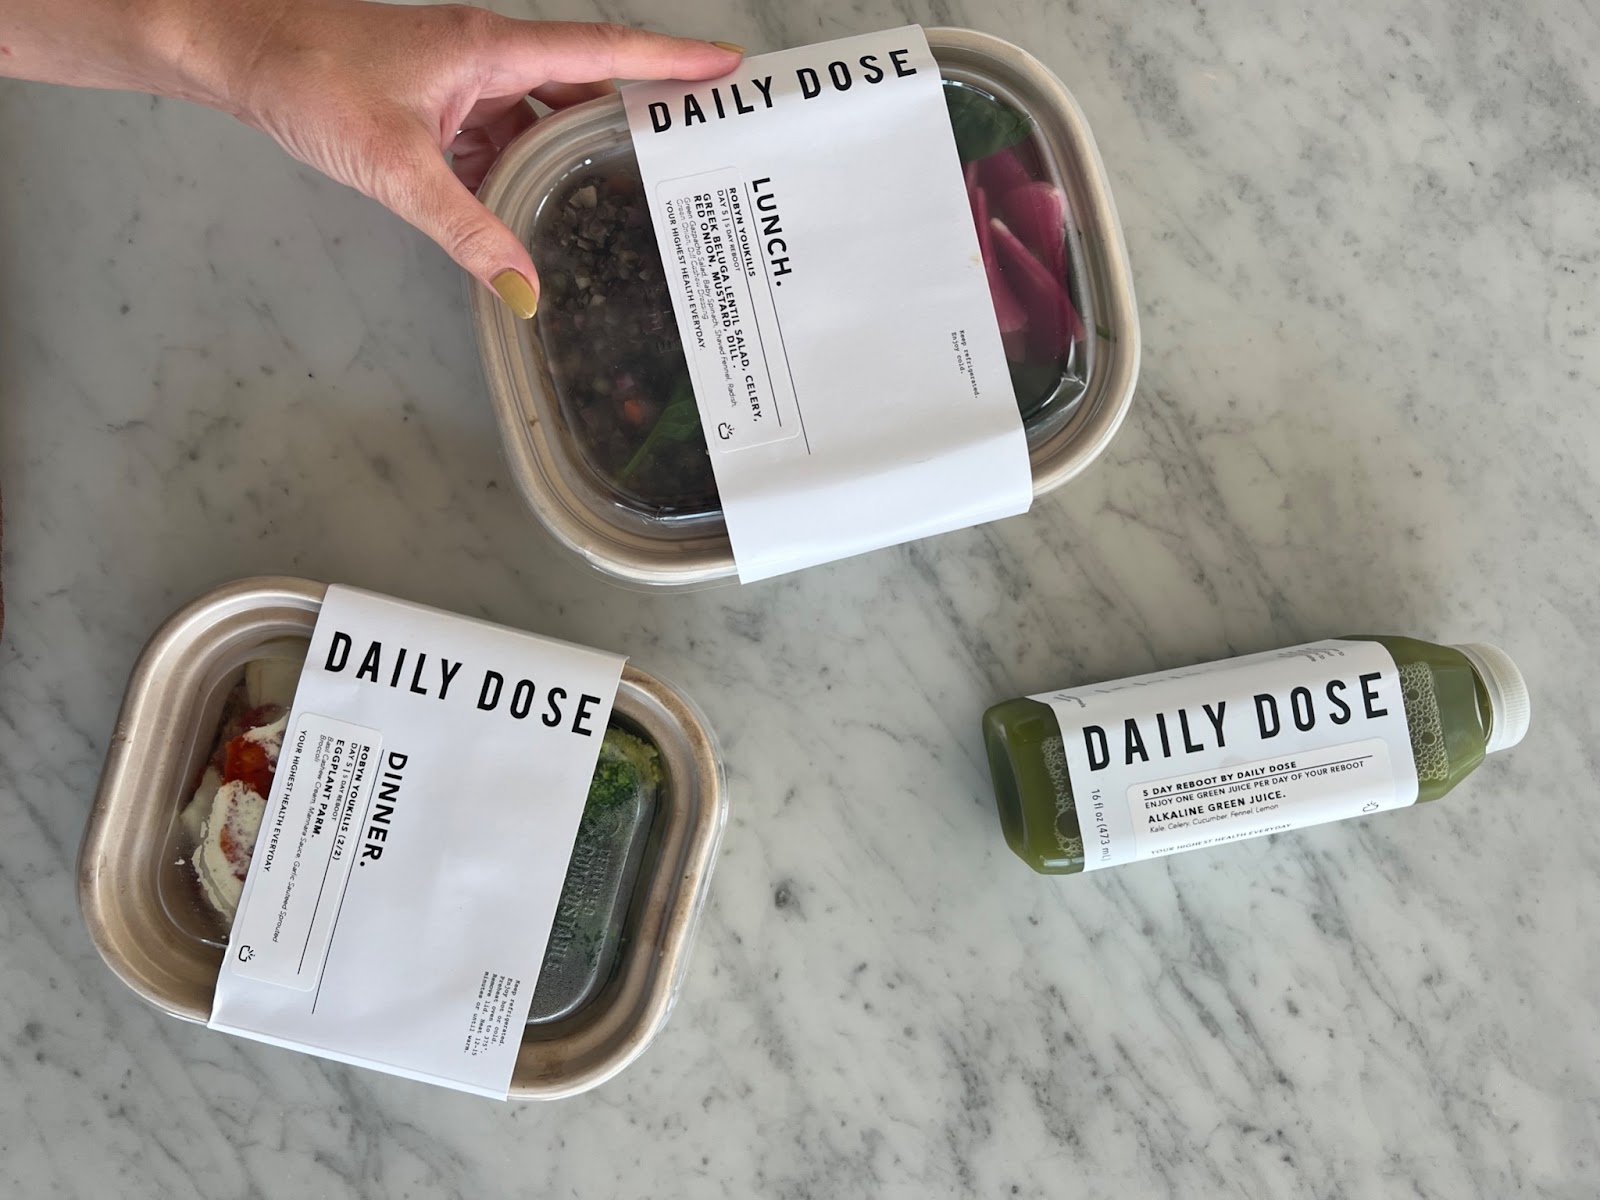 Healthy Meal Delivery Options I’m Loving